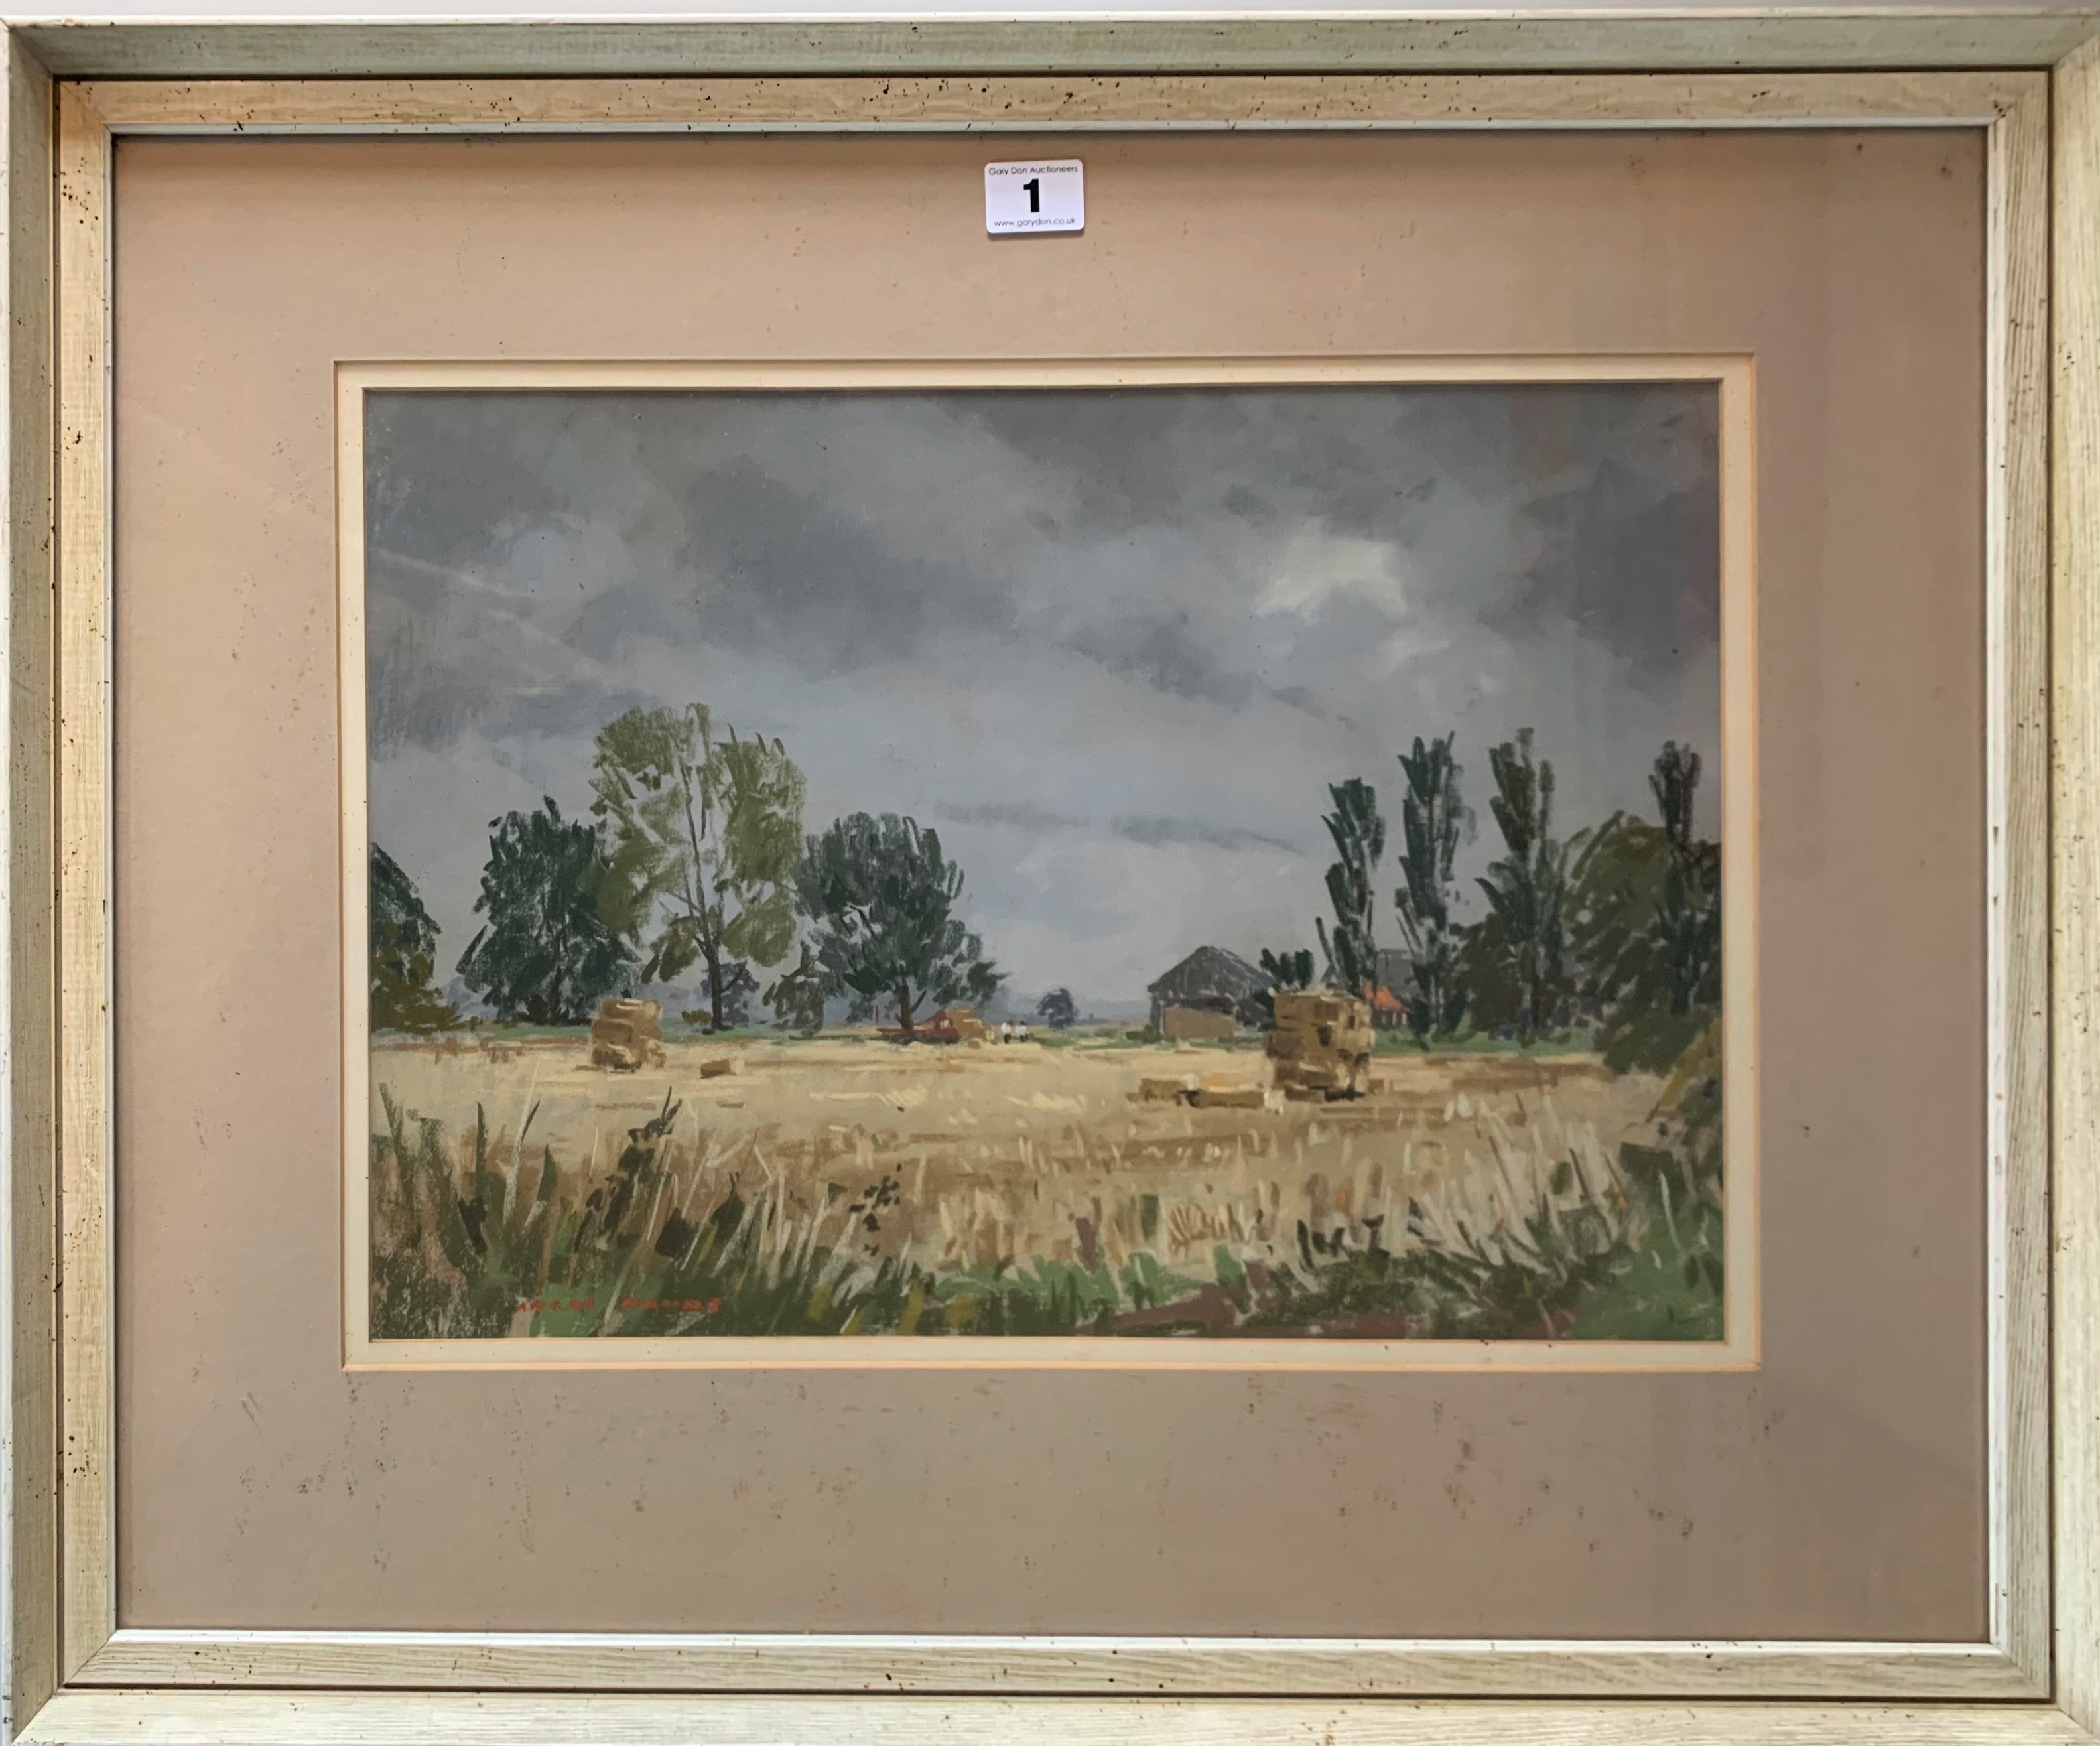 Watercolour “East Yorkshire Harvest” by Angus Rands. Image 17” x 12”, frame 26” x 21.5”. Woodlands